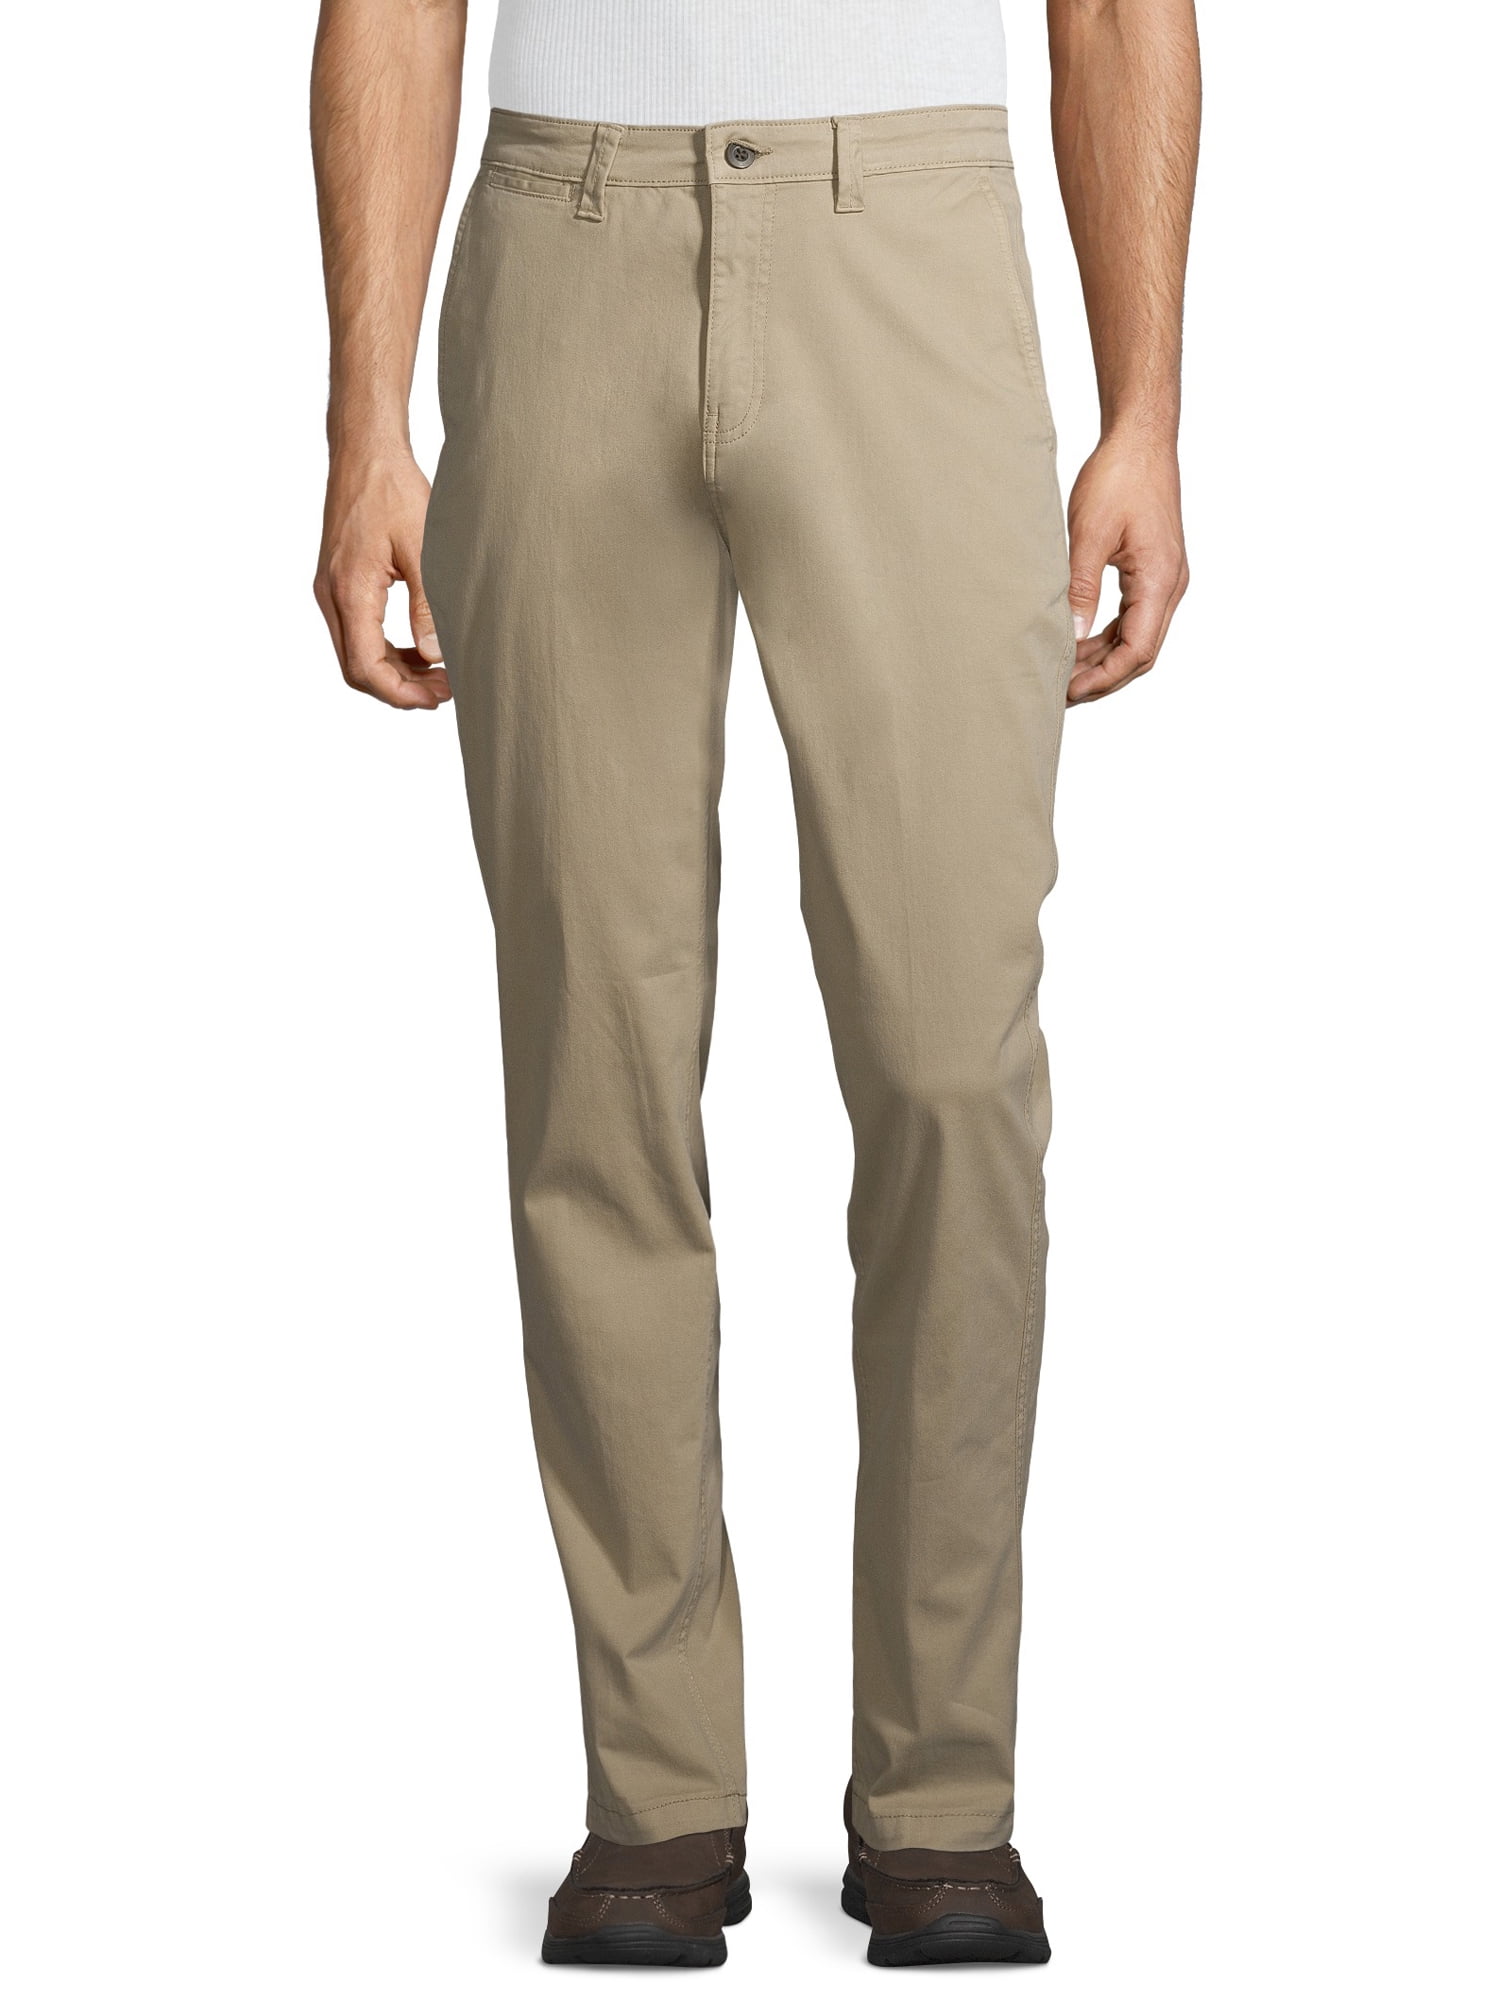 NEW MEN'S GEORGE STRAIGHT FIT FLAT FRONT  KHAKI  BARLEY COLOR PANTS.. TROUSERS 